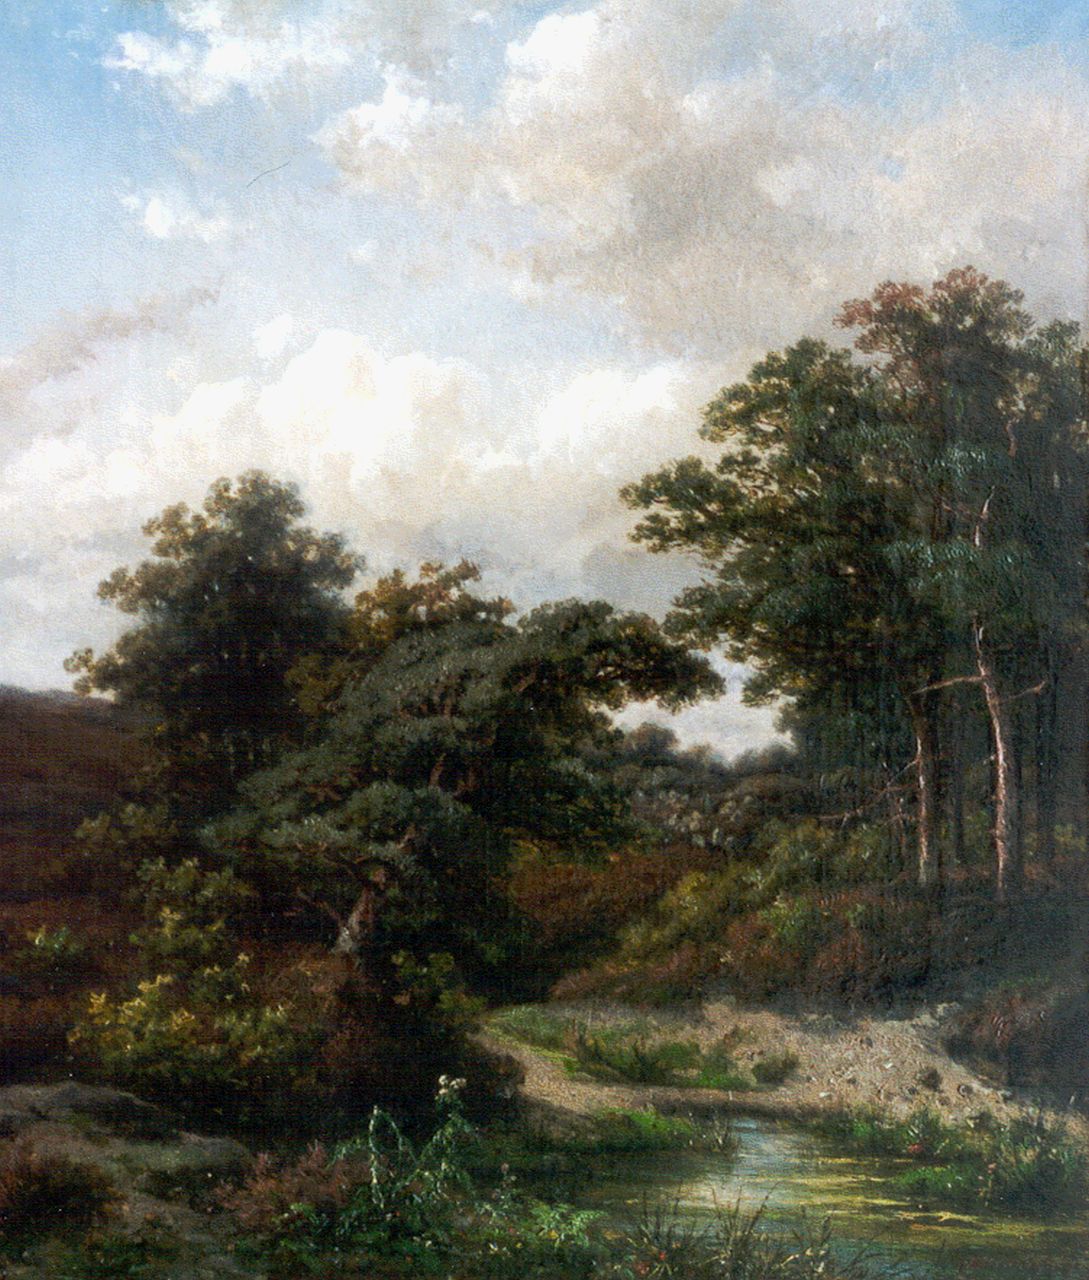 Meiners C.H.  | Claas Hendrik Meiners, A forest pond, Oosterbeek, Öl auf Leinwand 39,2 x 33,7 cm, signed l.r.